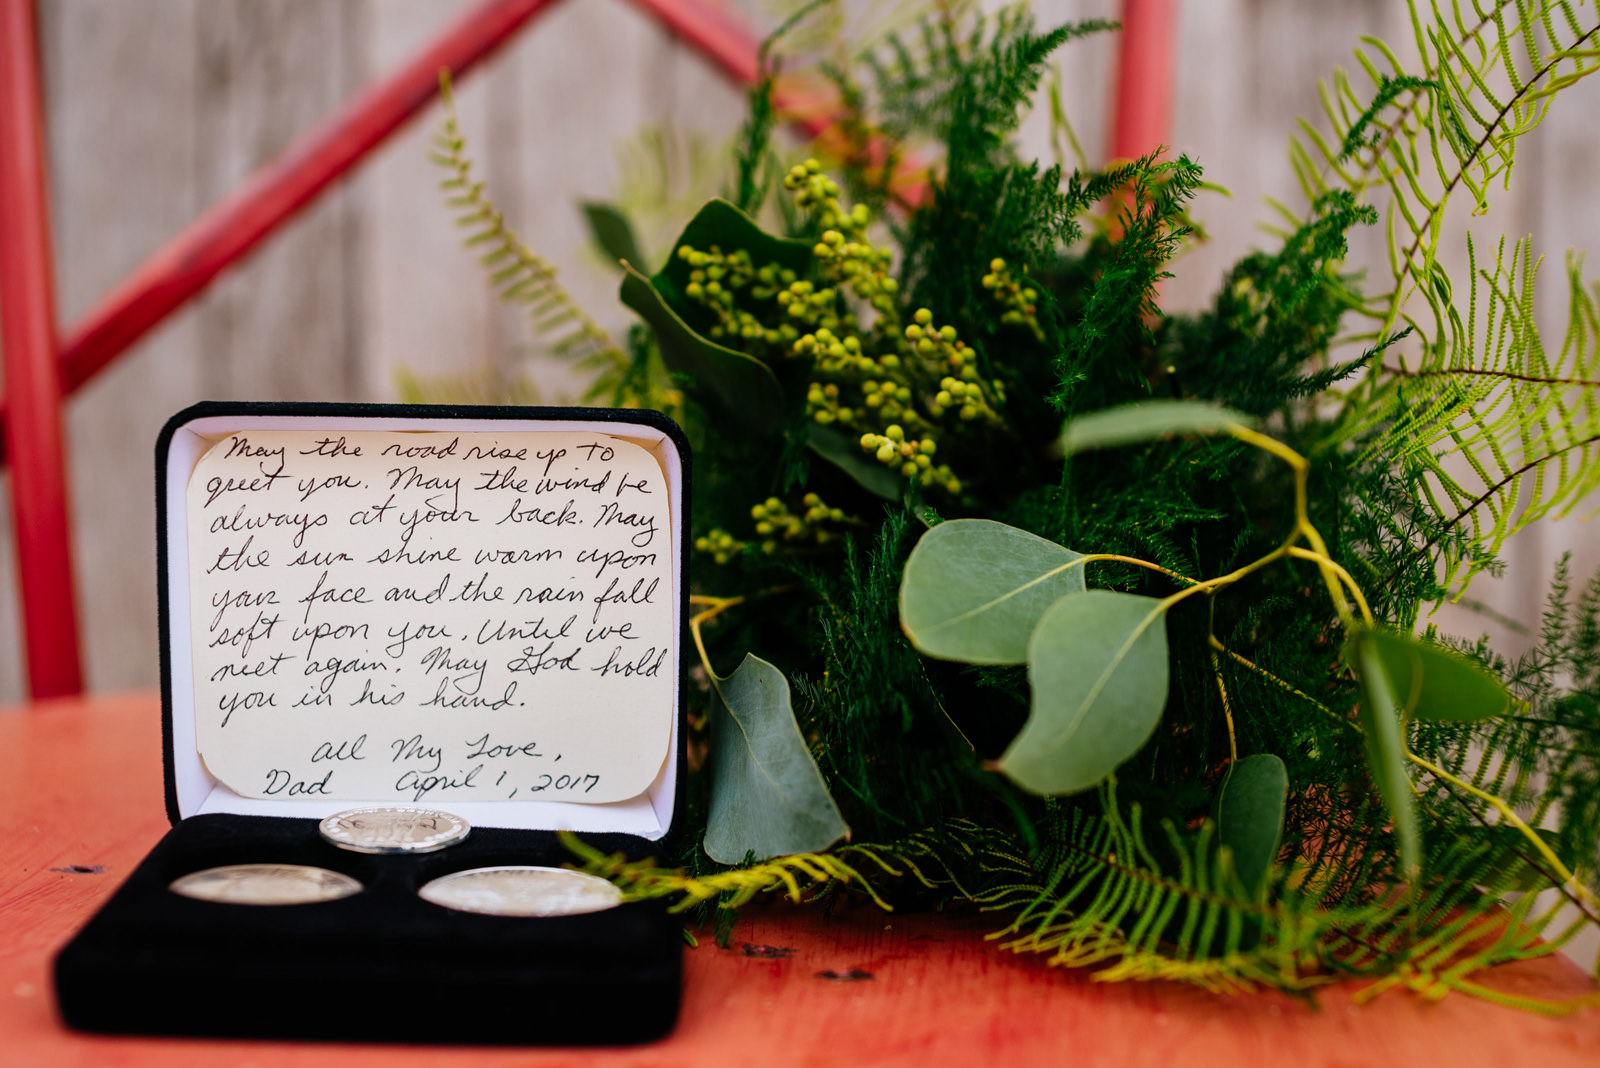 father gift and note to bride daughter wedding details